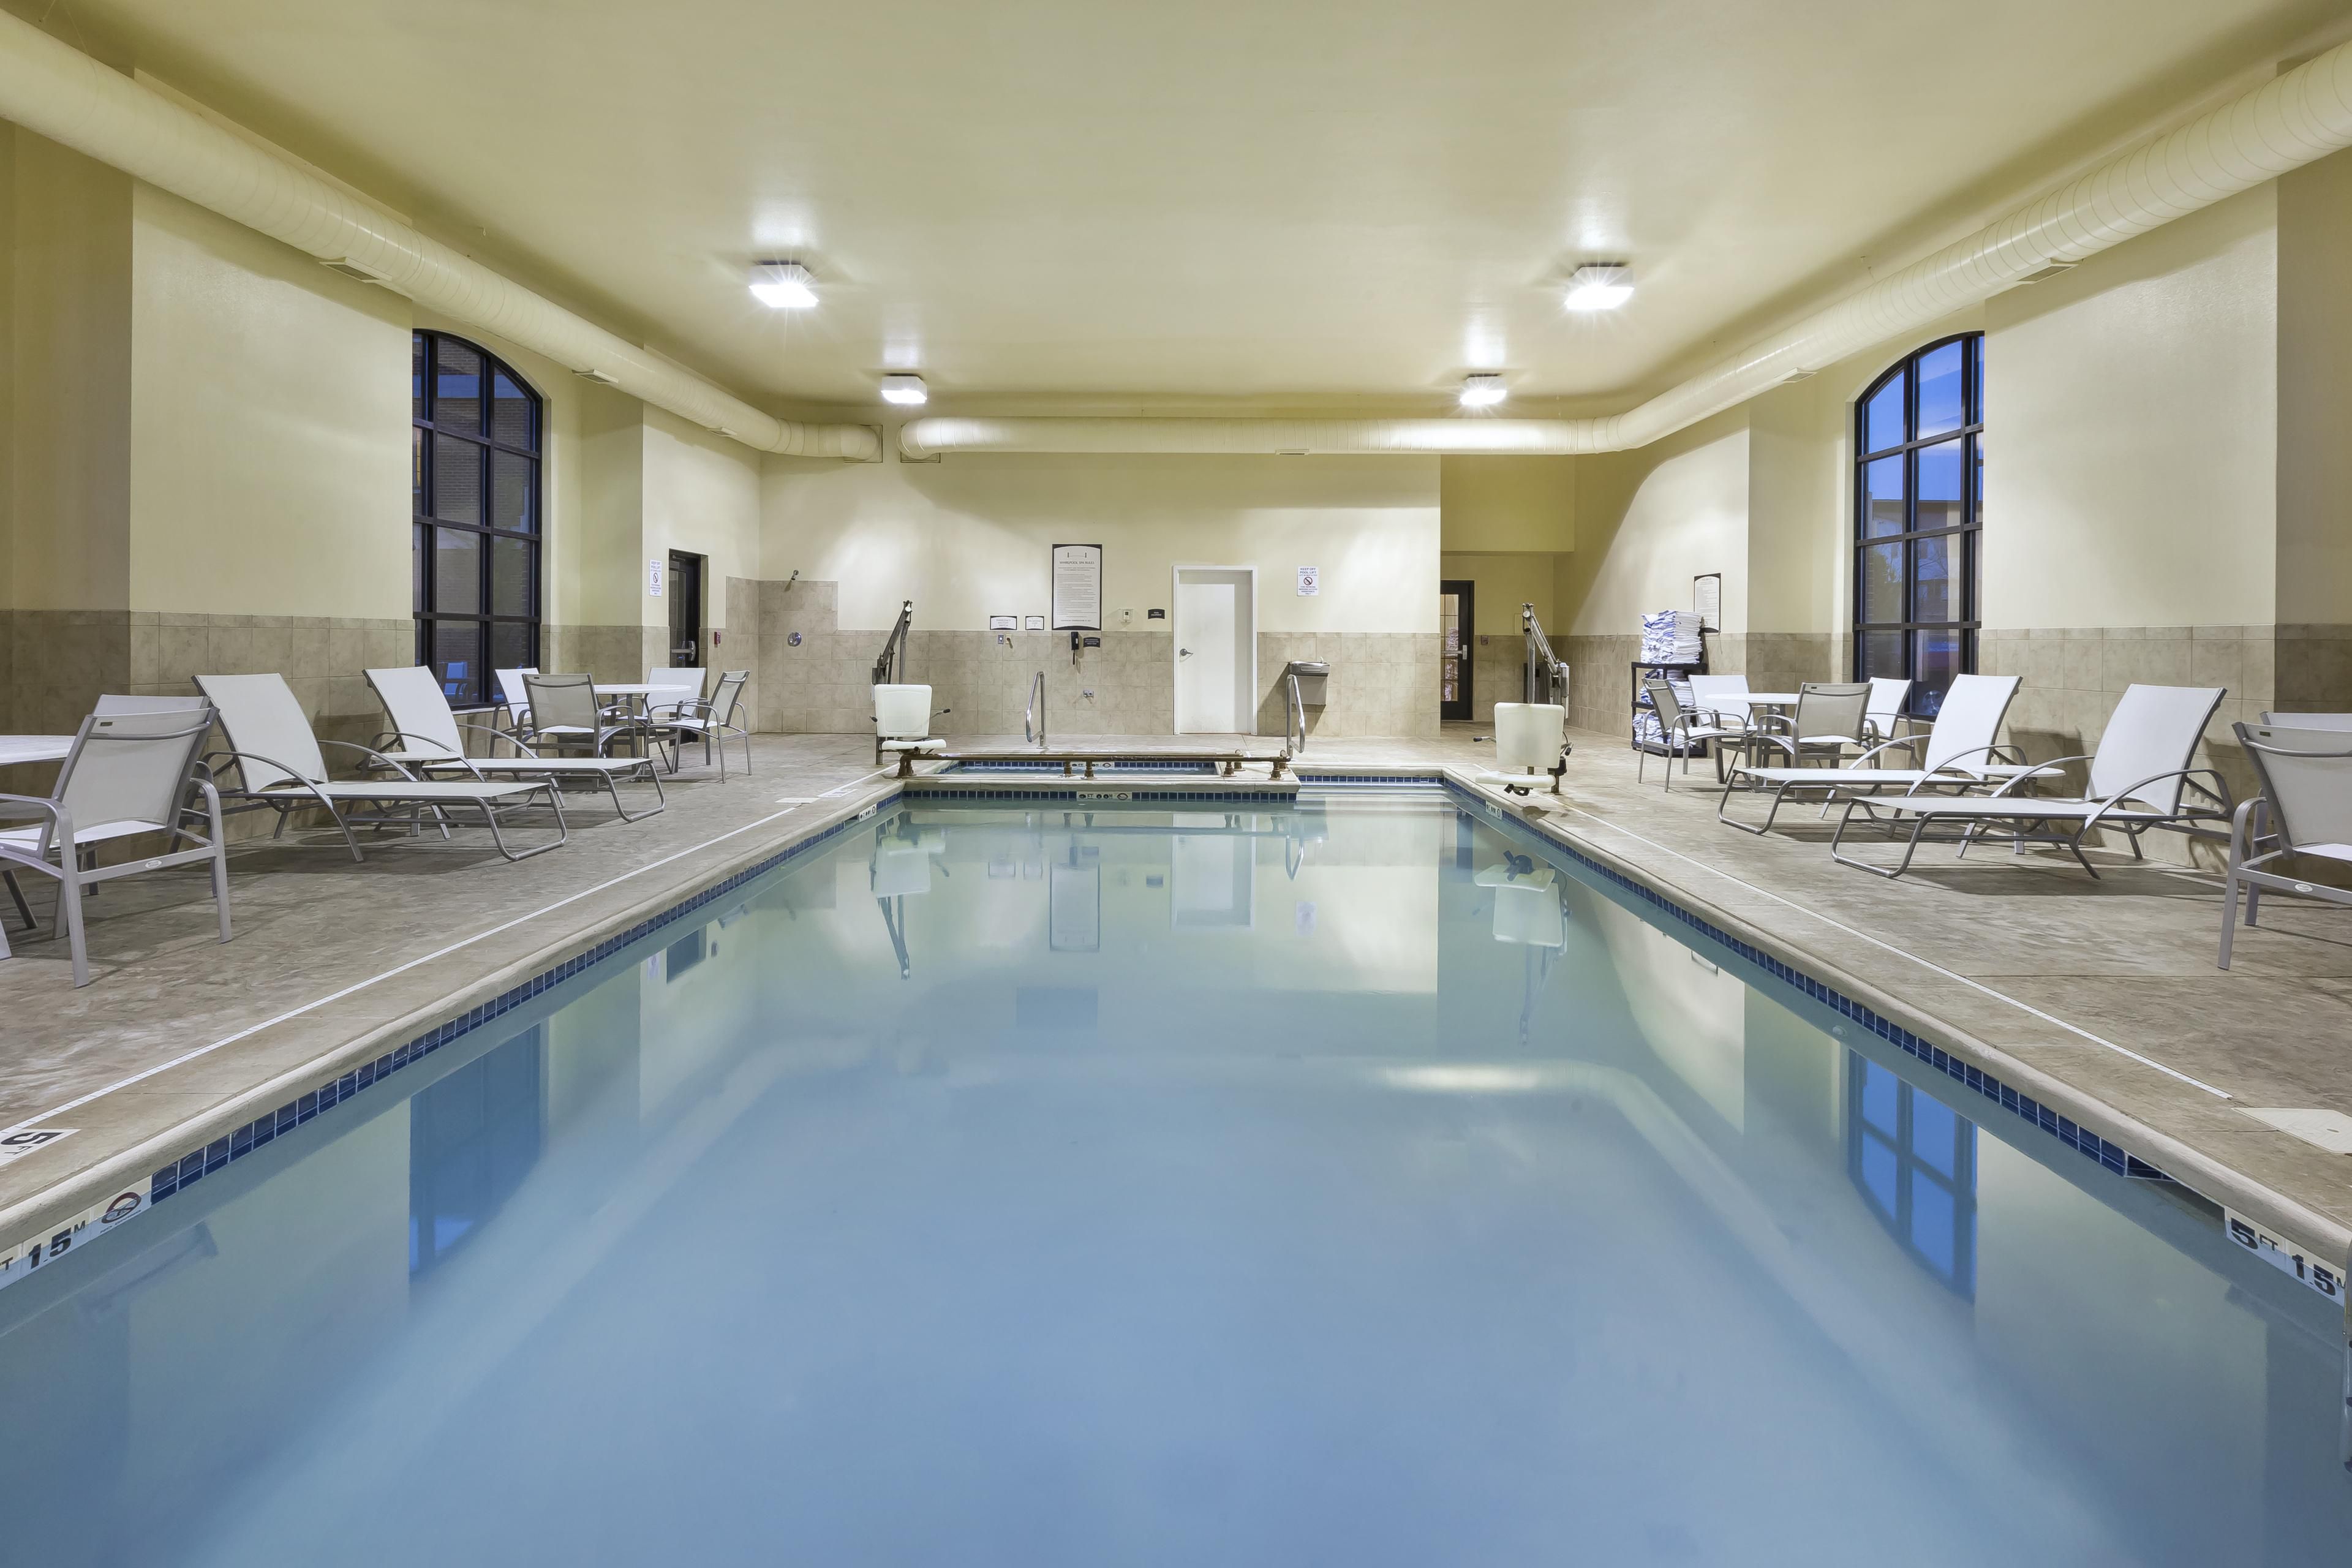 Enjoy and relax in our indoor pool, which is open the entire year!